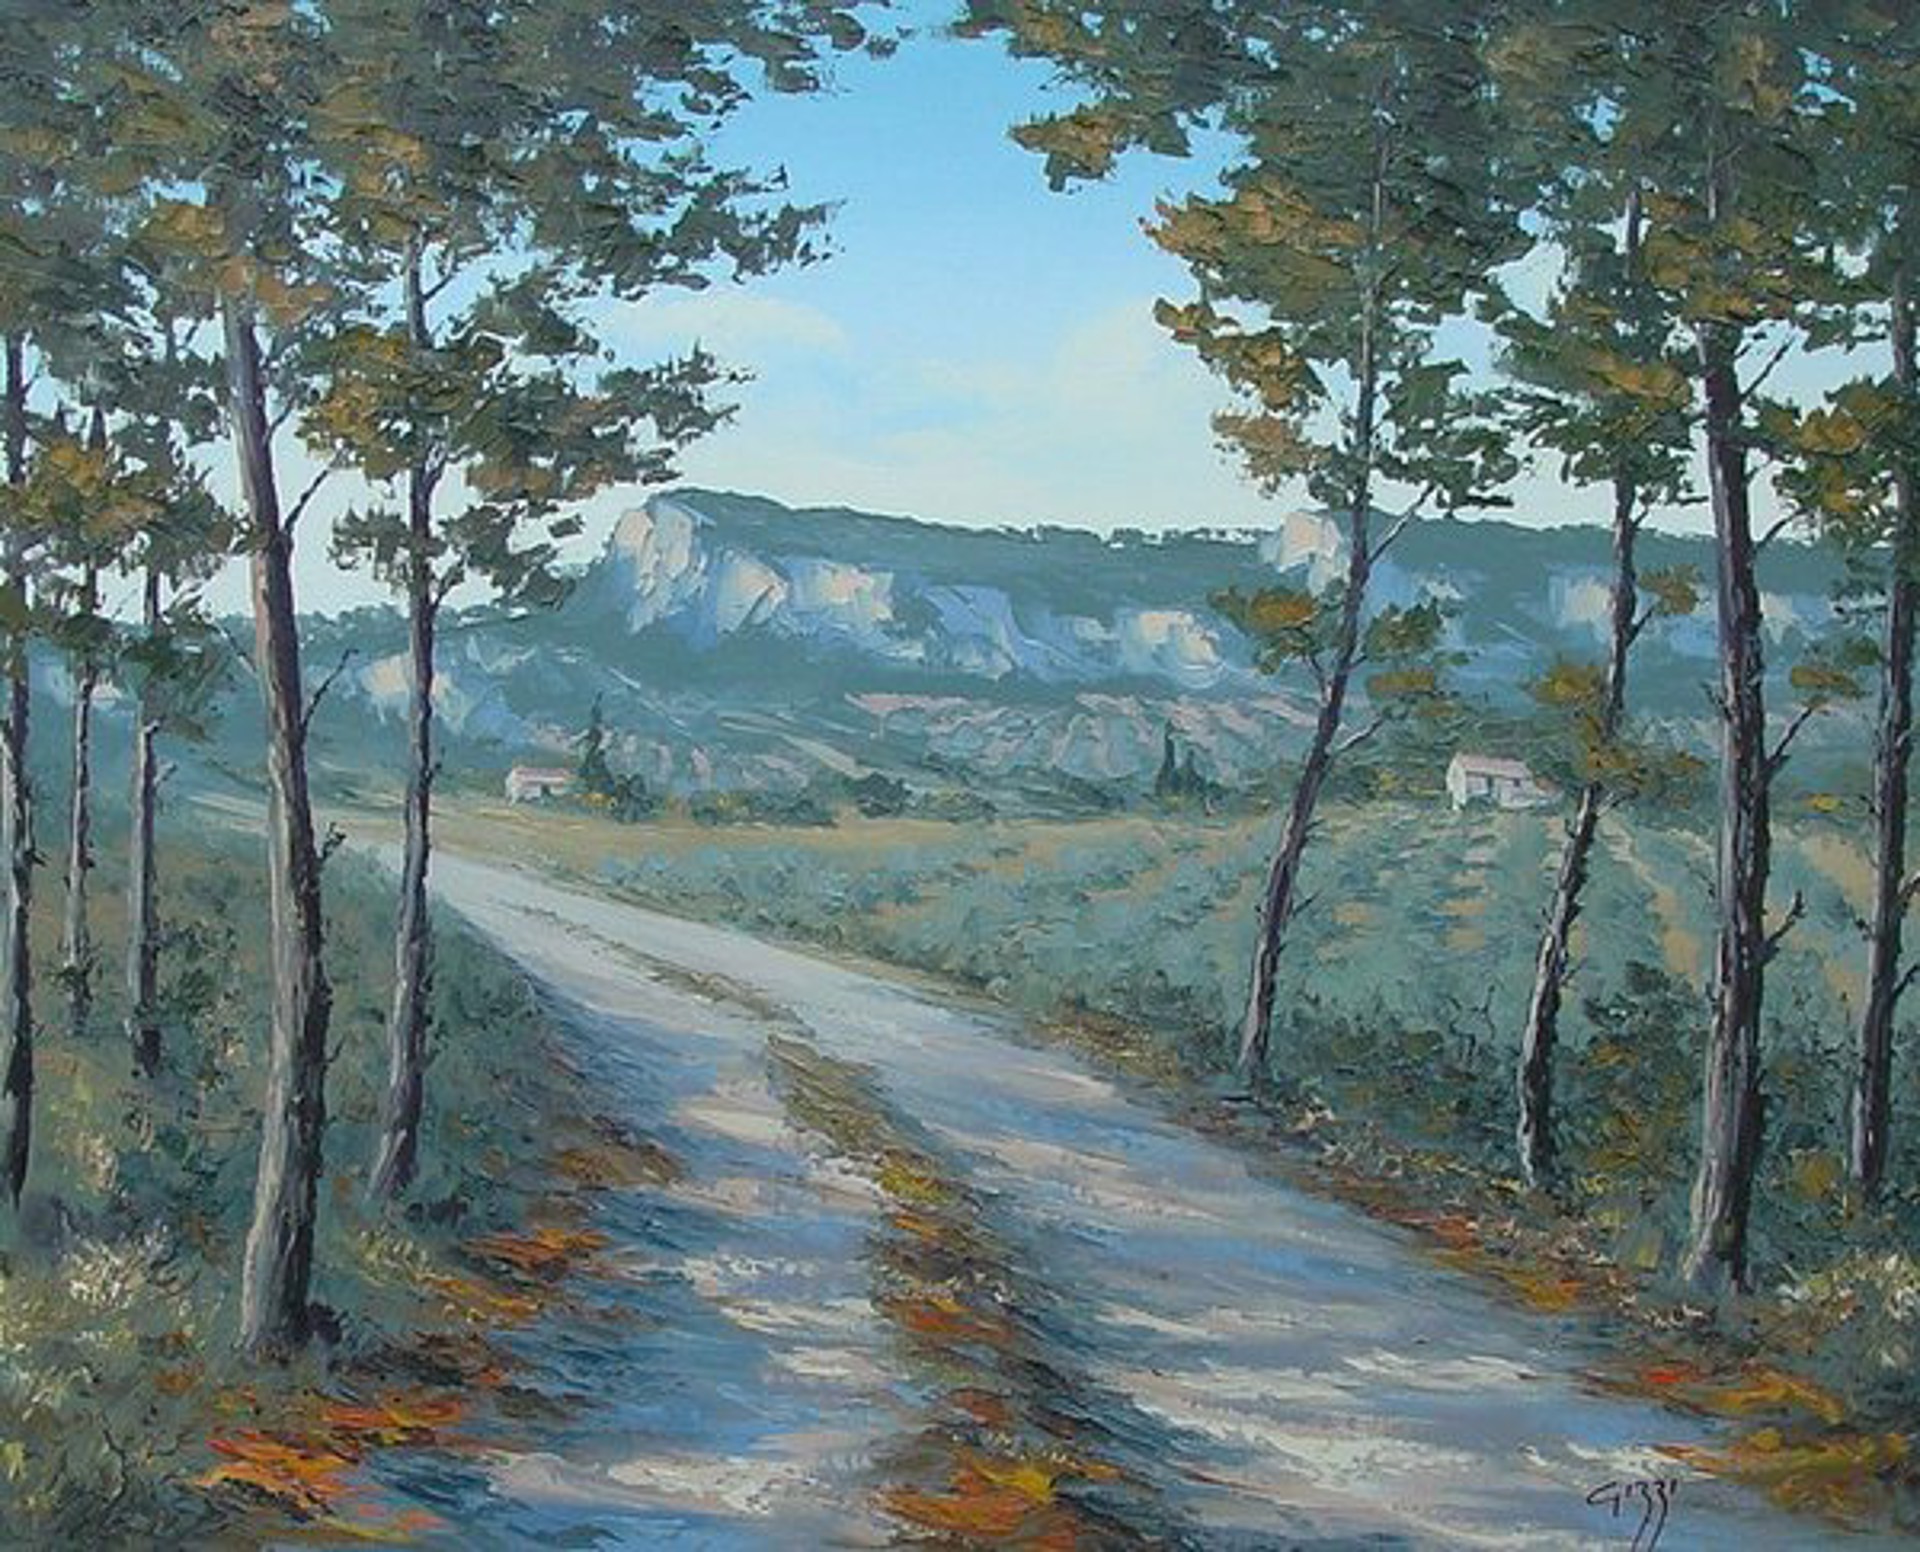 Road and Mountain by Raymond Gizzi